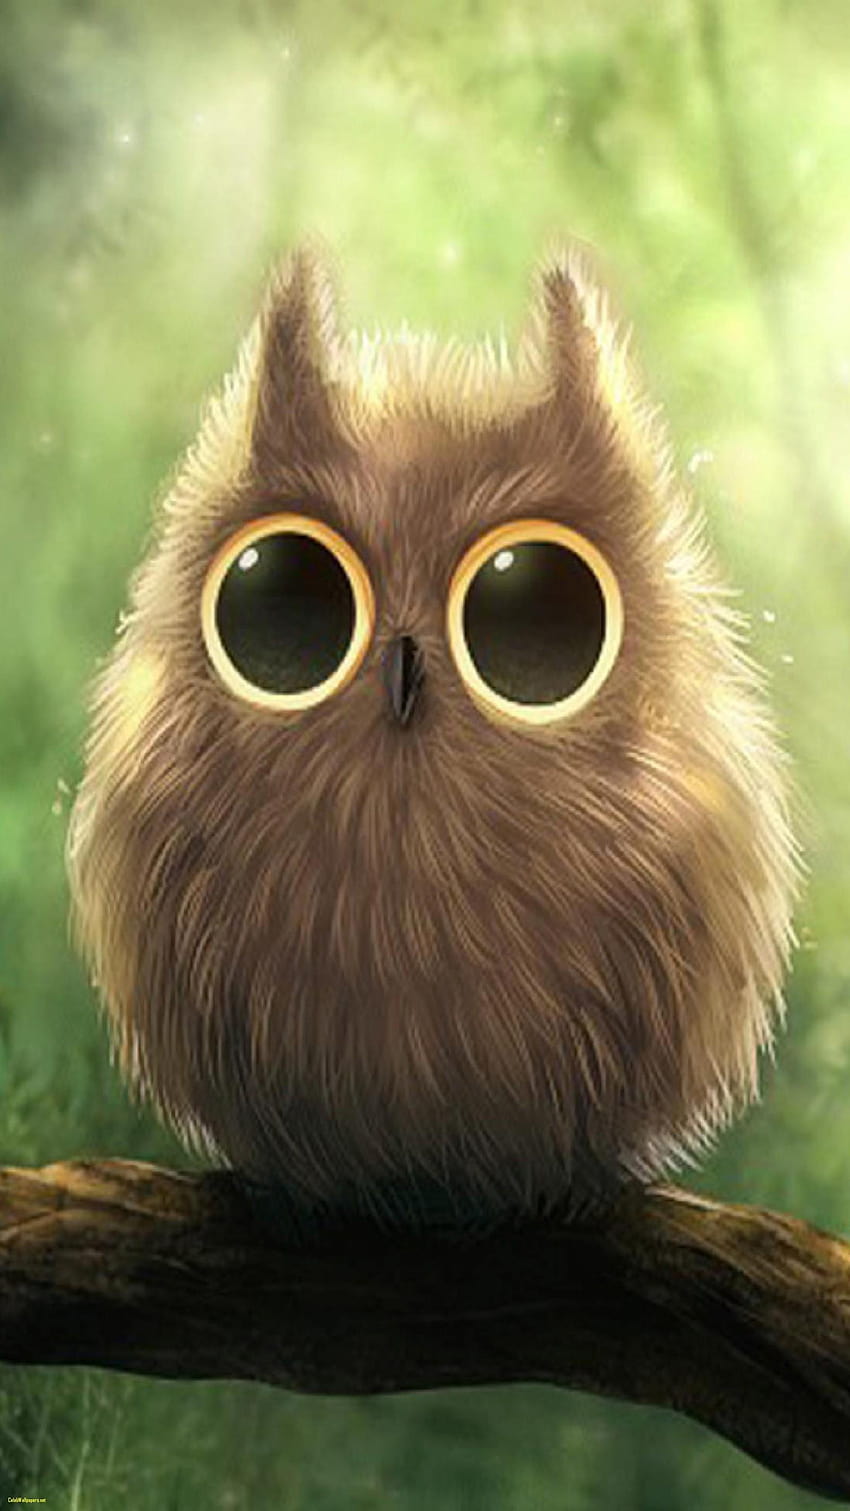 How To Draw An Anime Owl, Step by Step, Drawing Guide, by Dawn - DragoArt